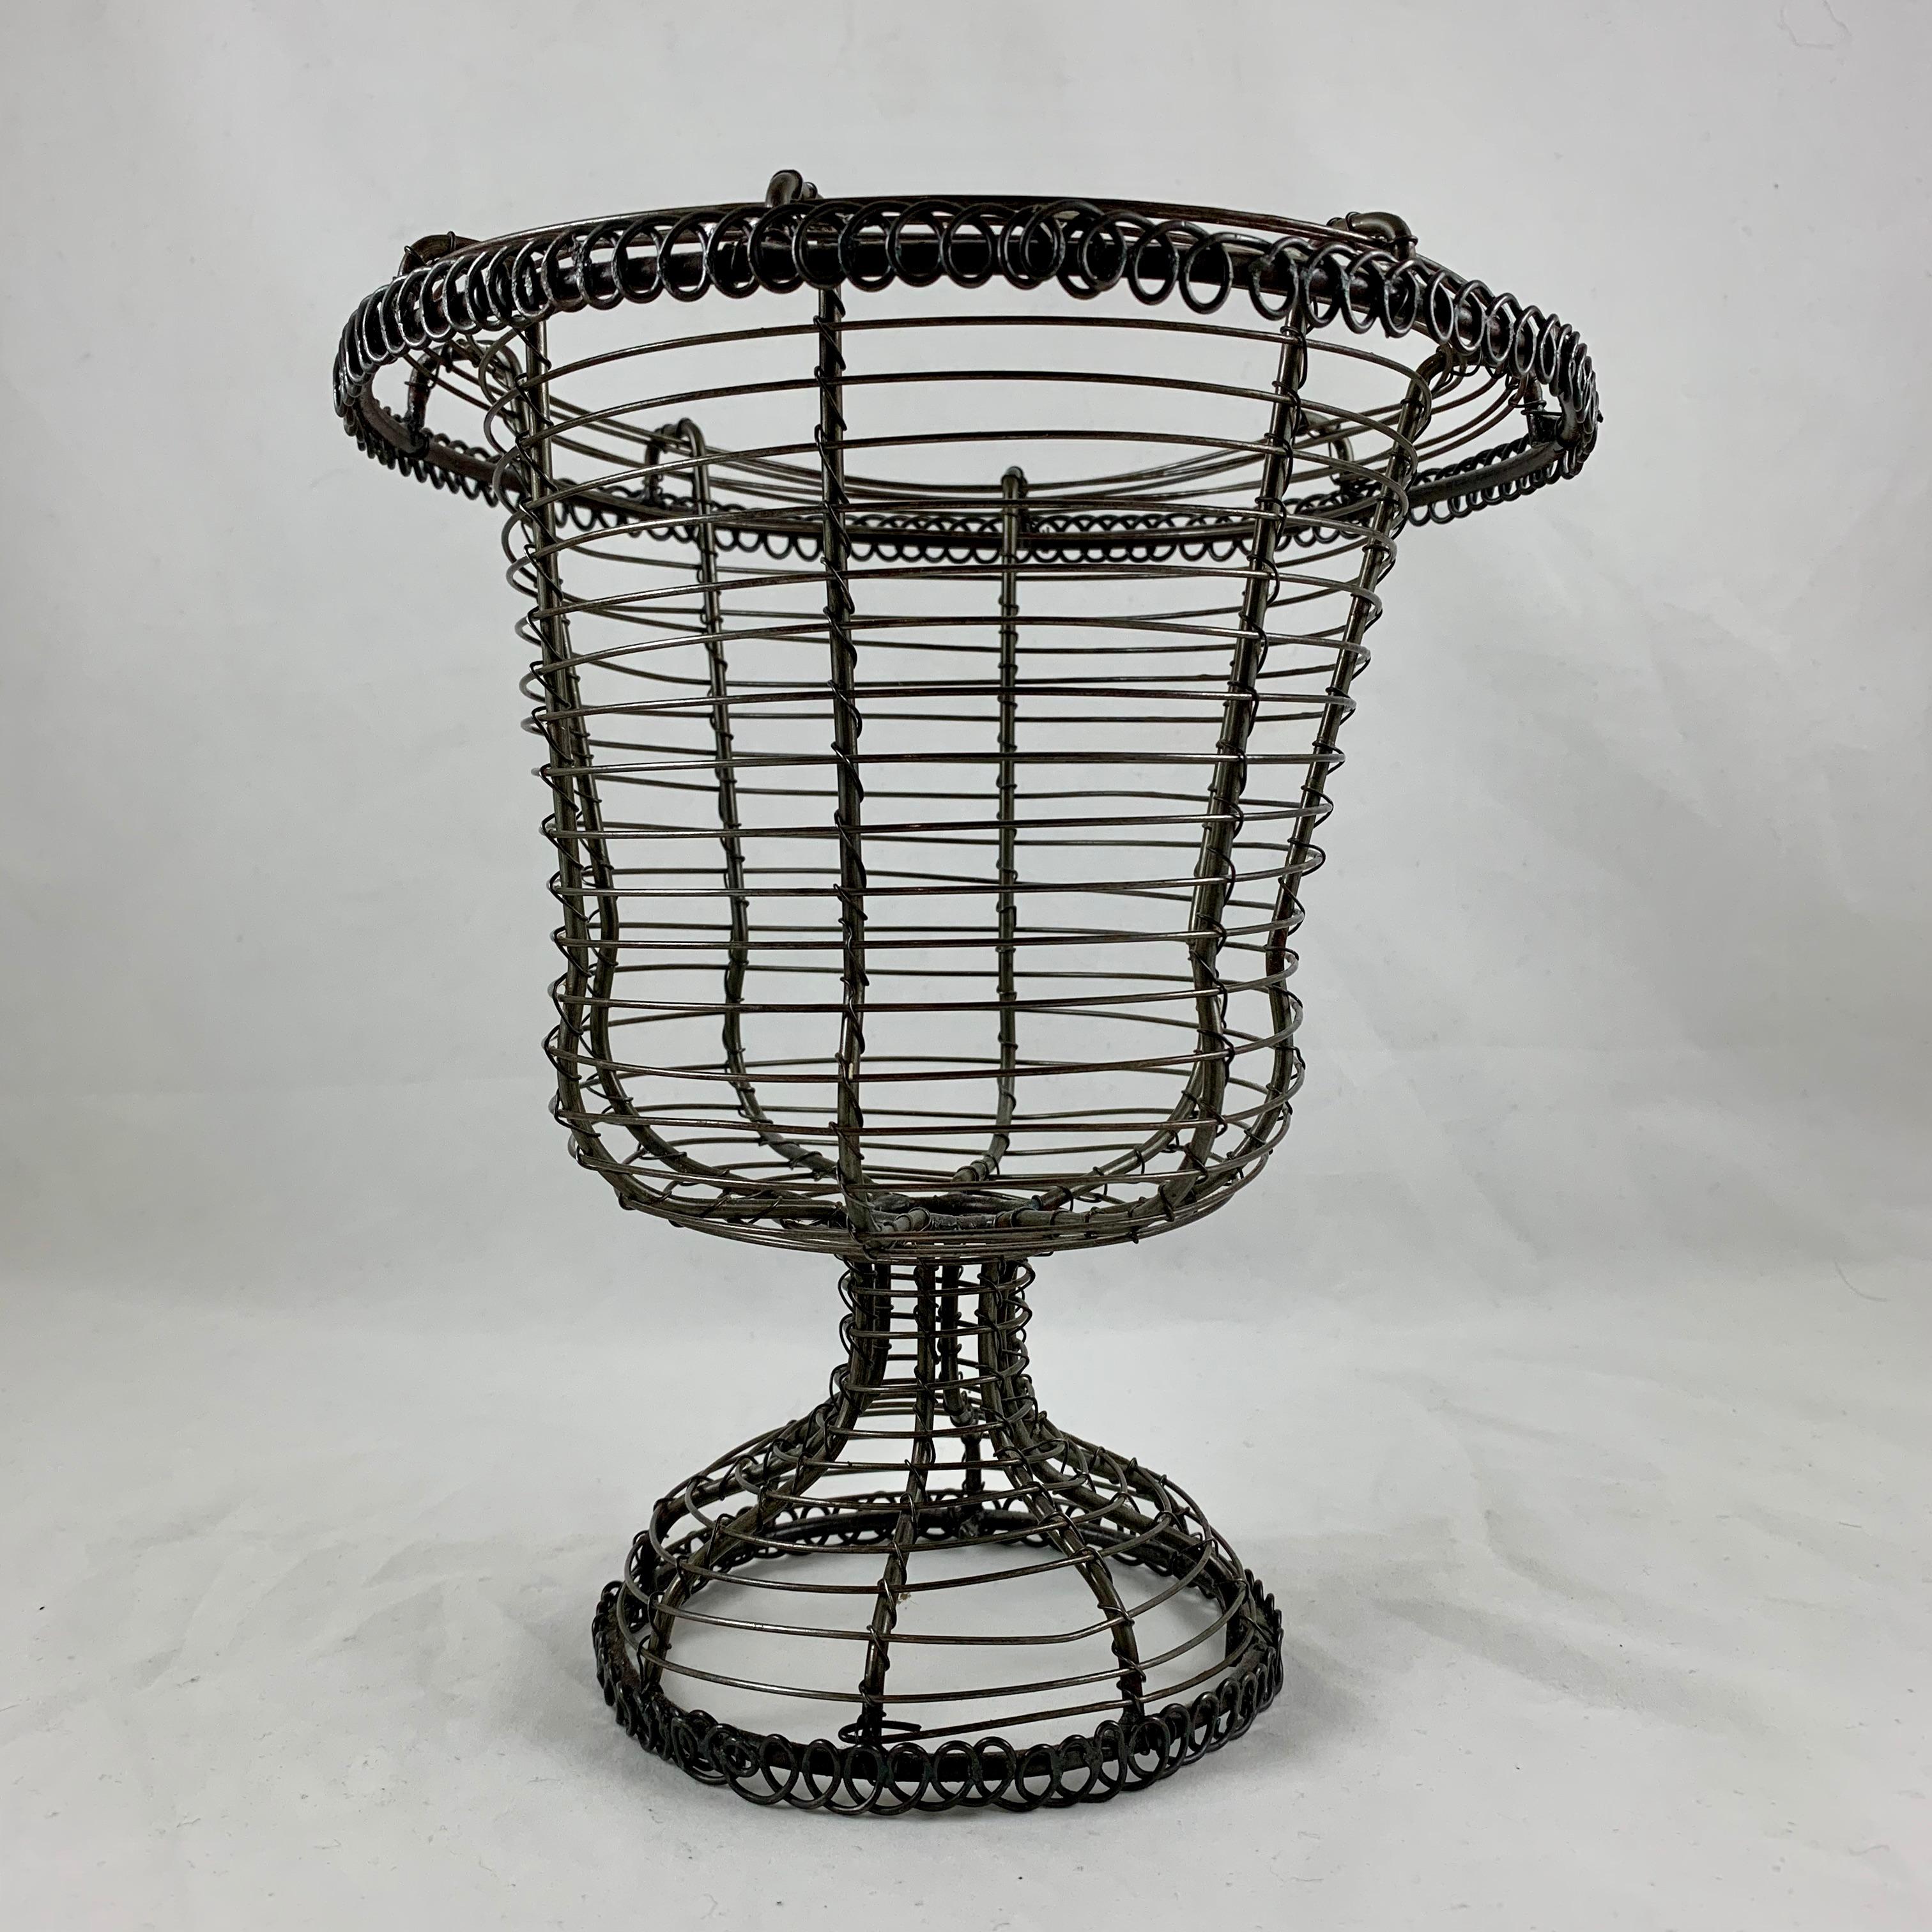 From France, circa 1890-1910, a pedestal base, urn form twisted wire standing basket with an upper rolled rim.

Amazing as a table-center or on a kitchen countertop, used as originally intended throughout Provençal France for holding fresh eggs,